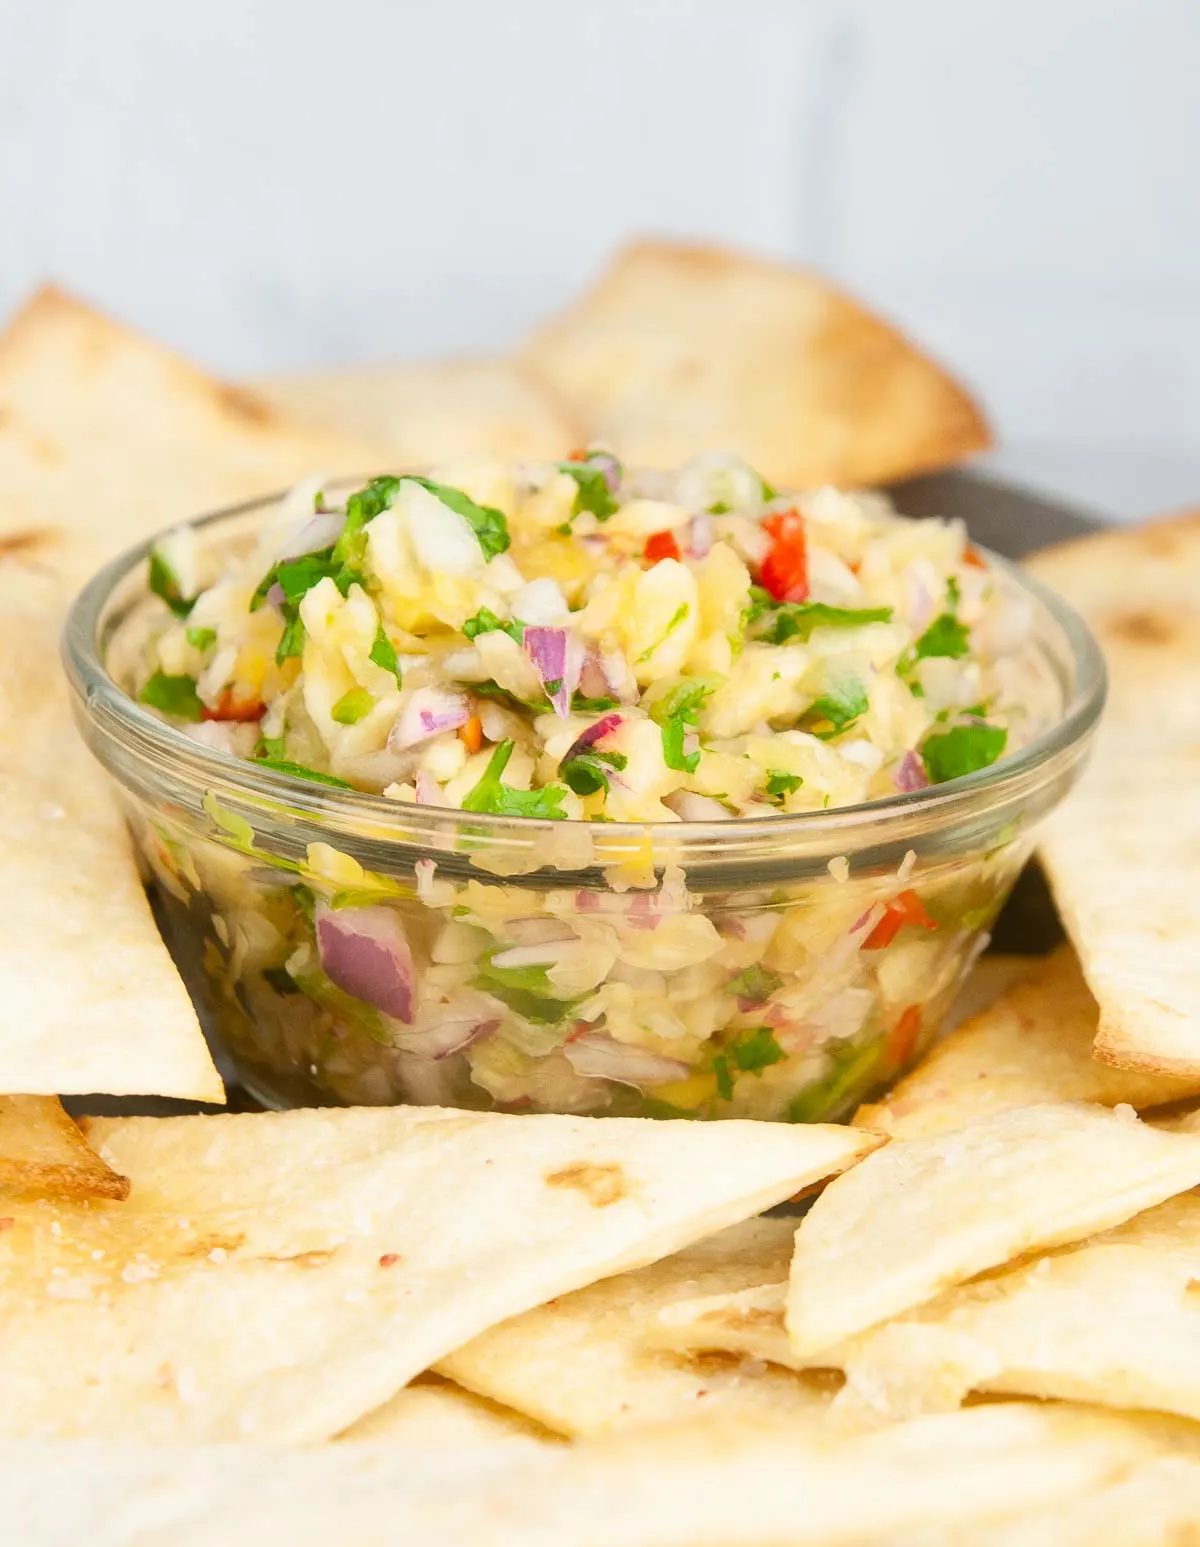 Pineapple mango salsa makes a yummy dip for chips or topping for tacos, grilled chicken, and fish.